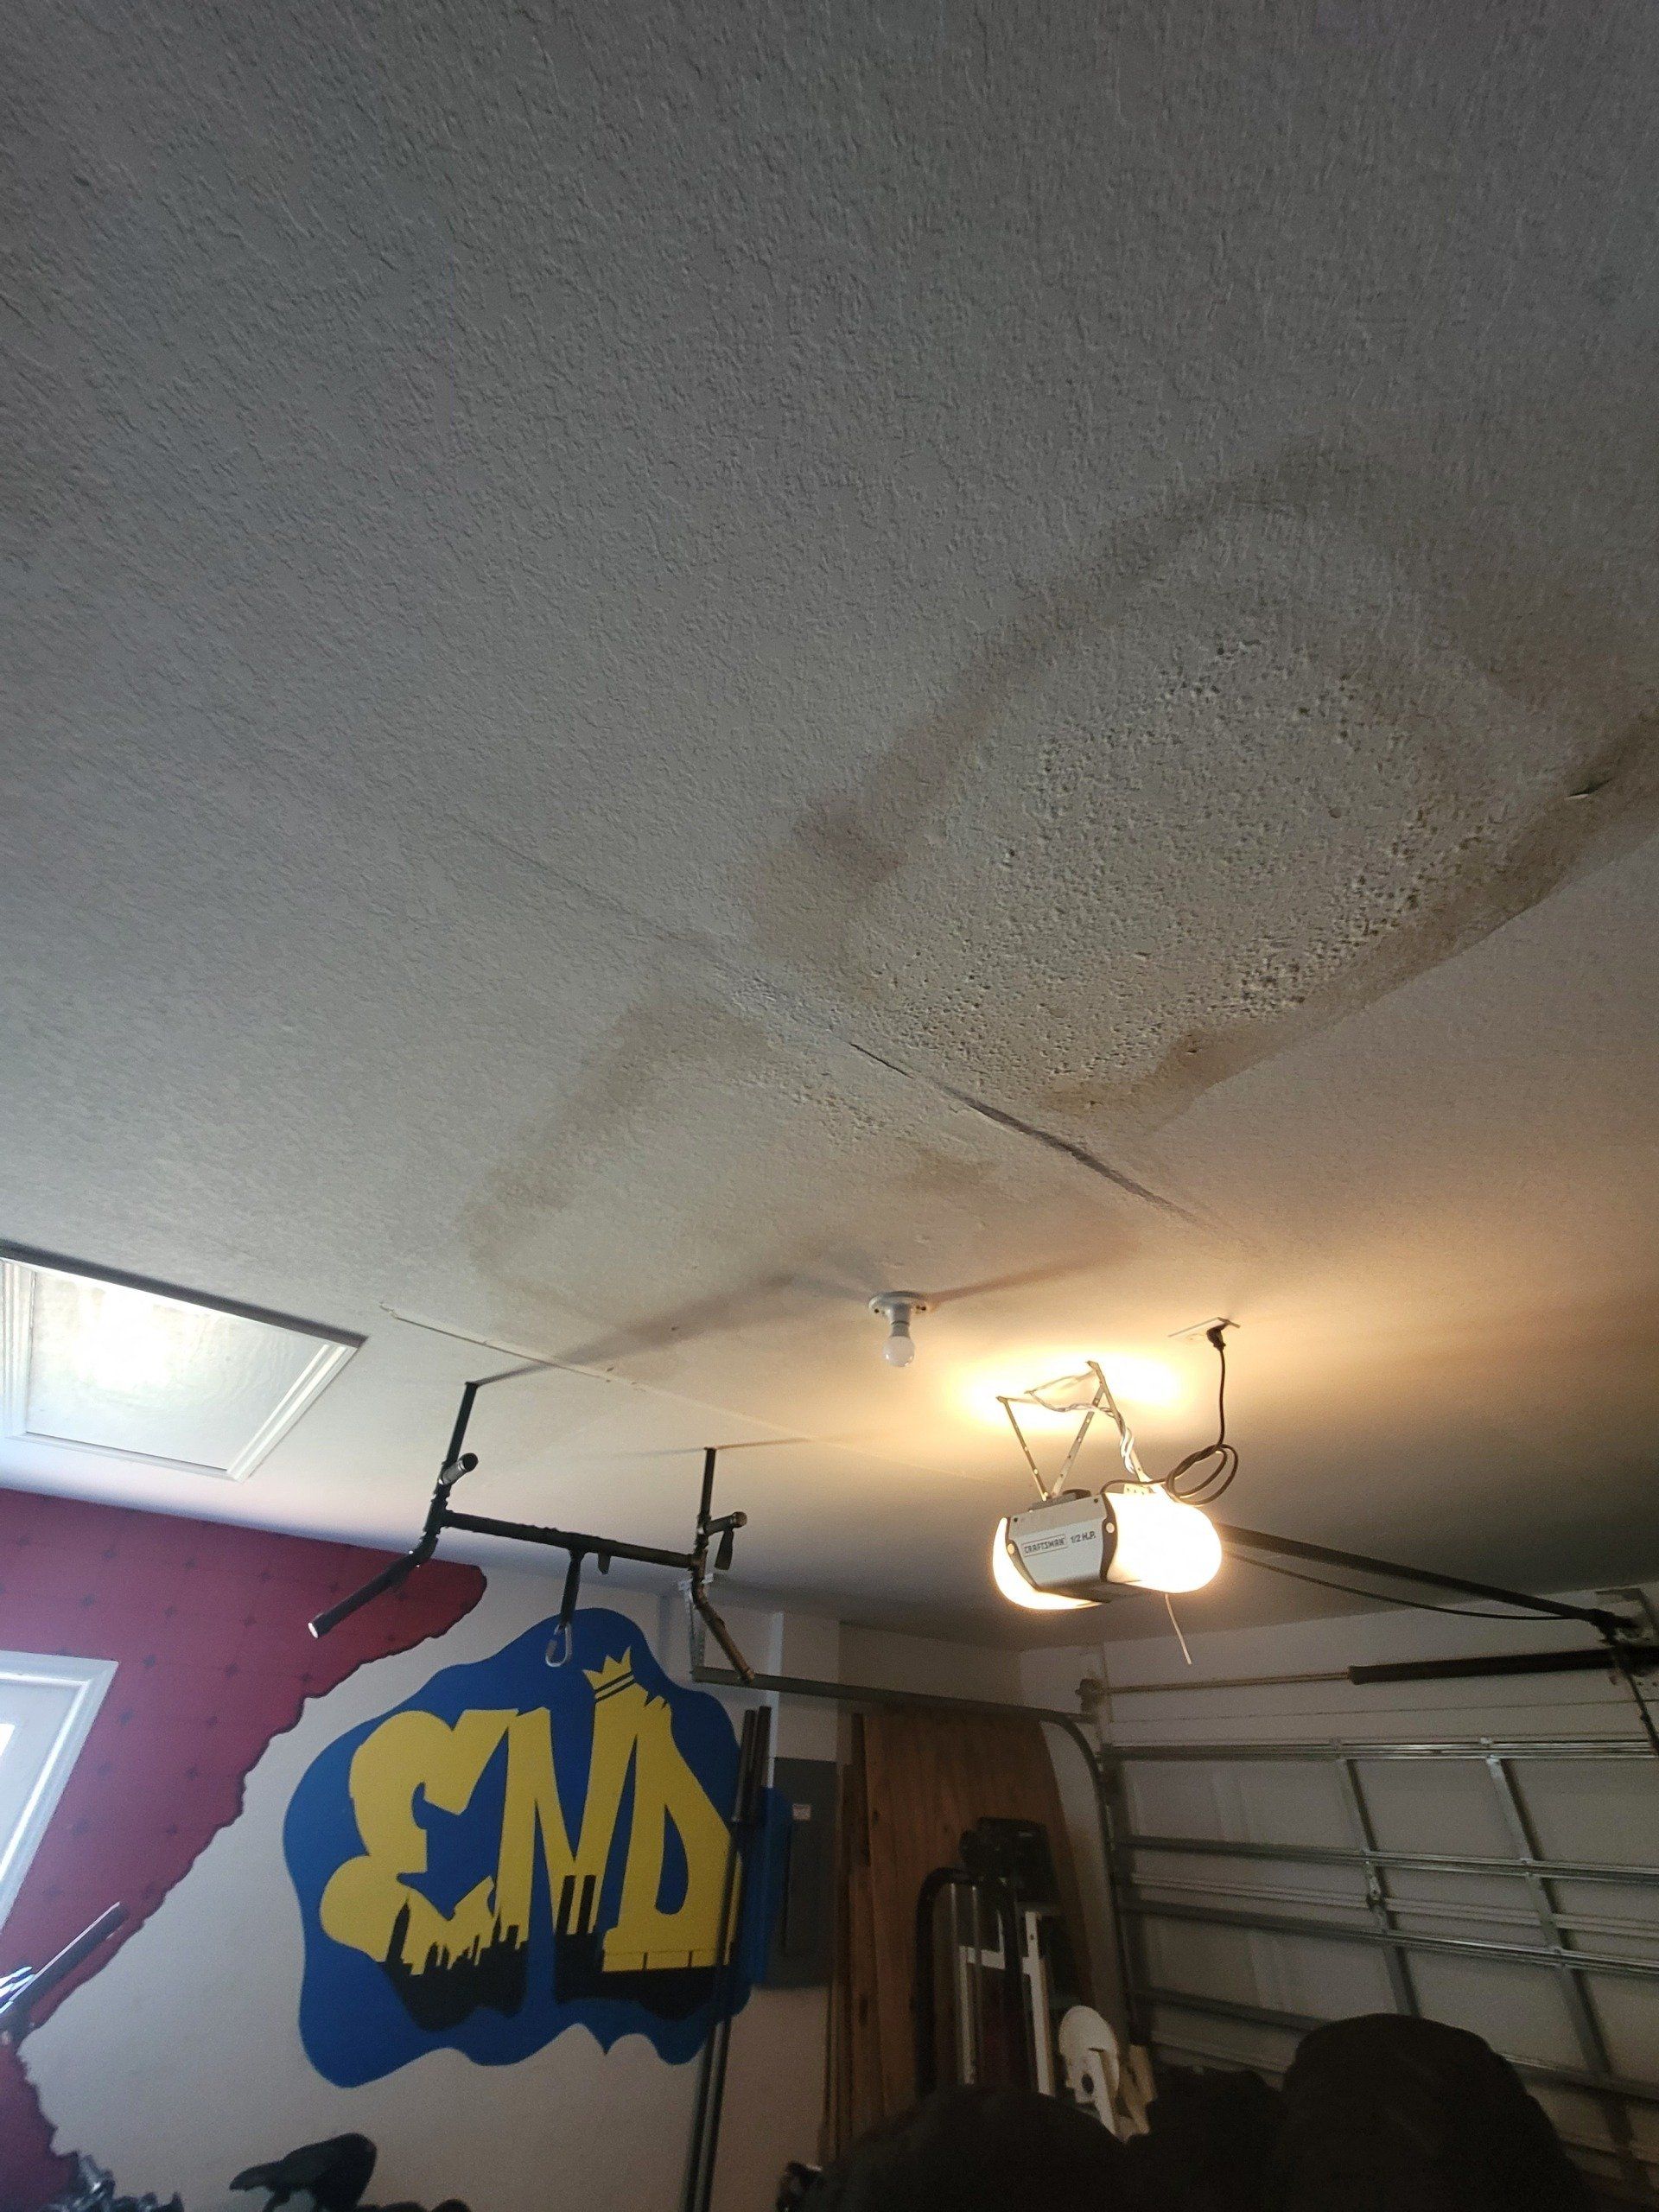 A ceiling in a garage with a sign that says smd on it